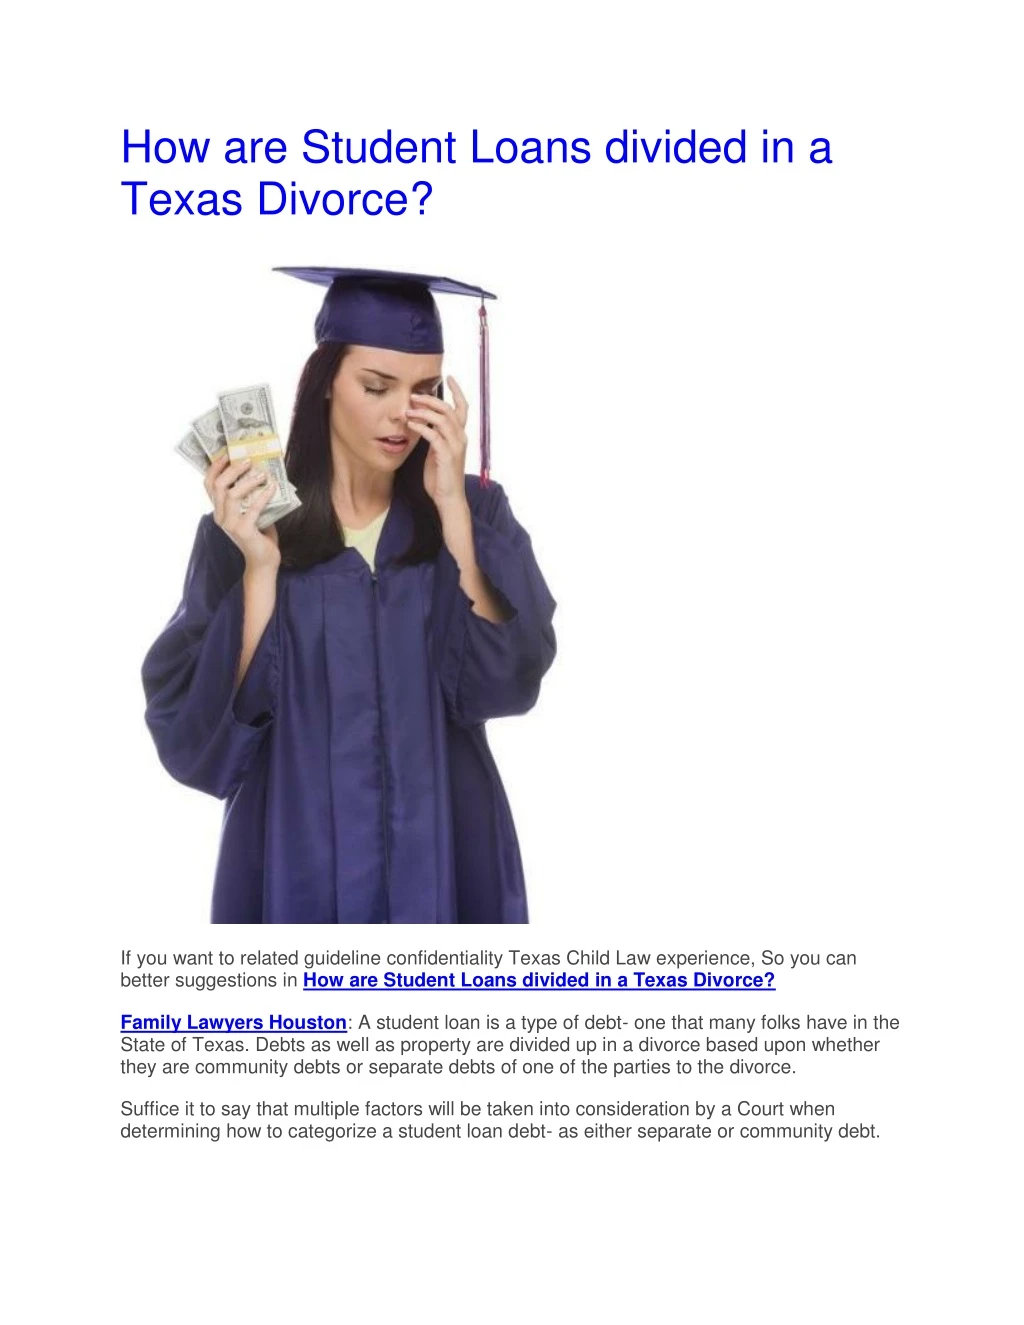 how are student loans divided in a texas divorce